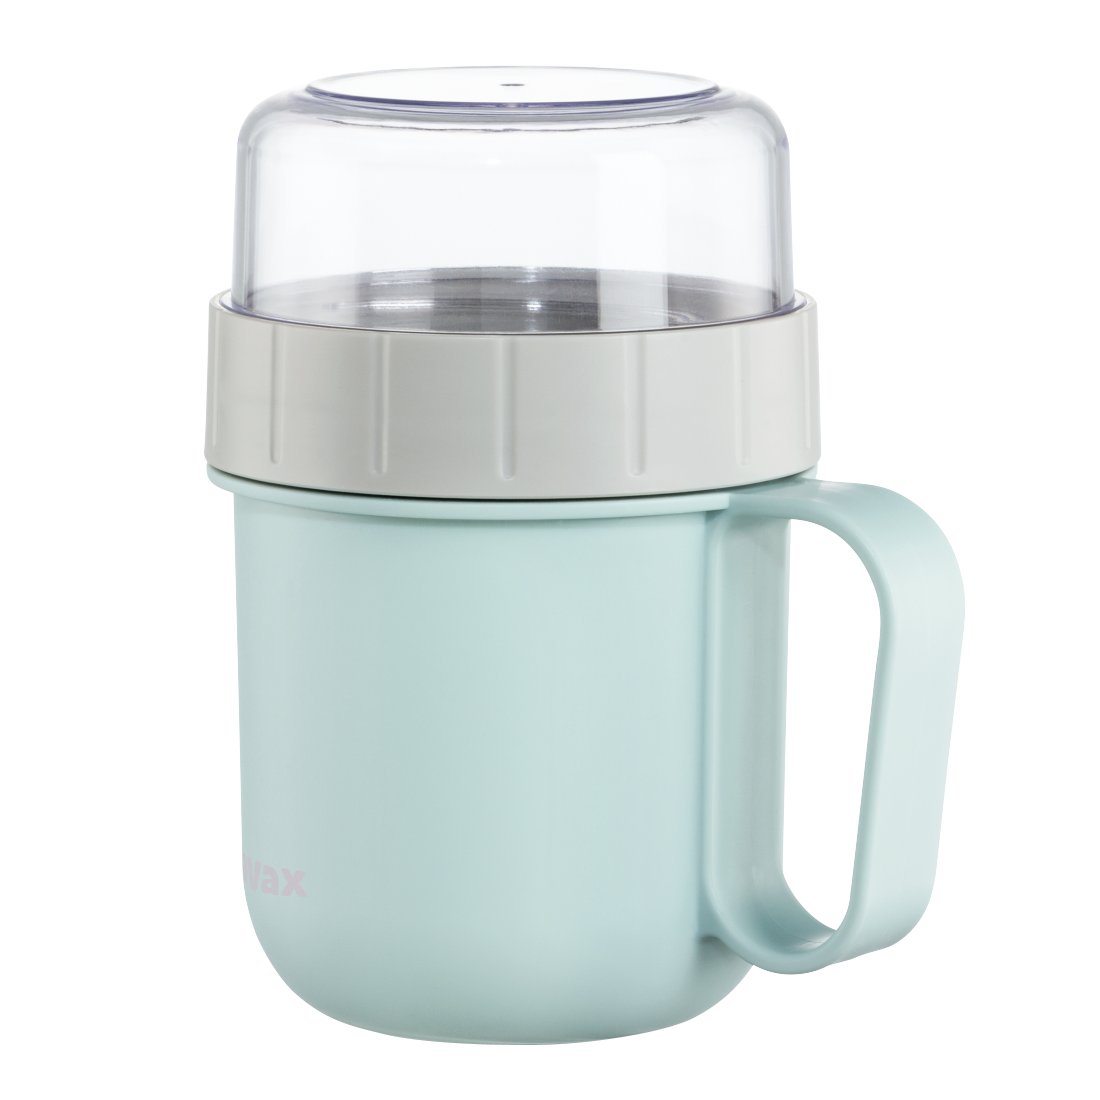 abx2 High-Res Image 2 - Xavax, Cereal Mug To Go, with Topper, 2 Compartments, 500 + 200 ml, pastel blue/grey